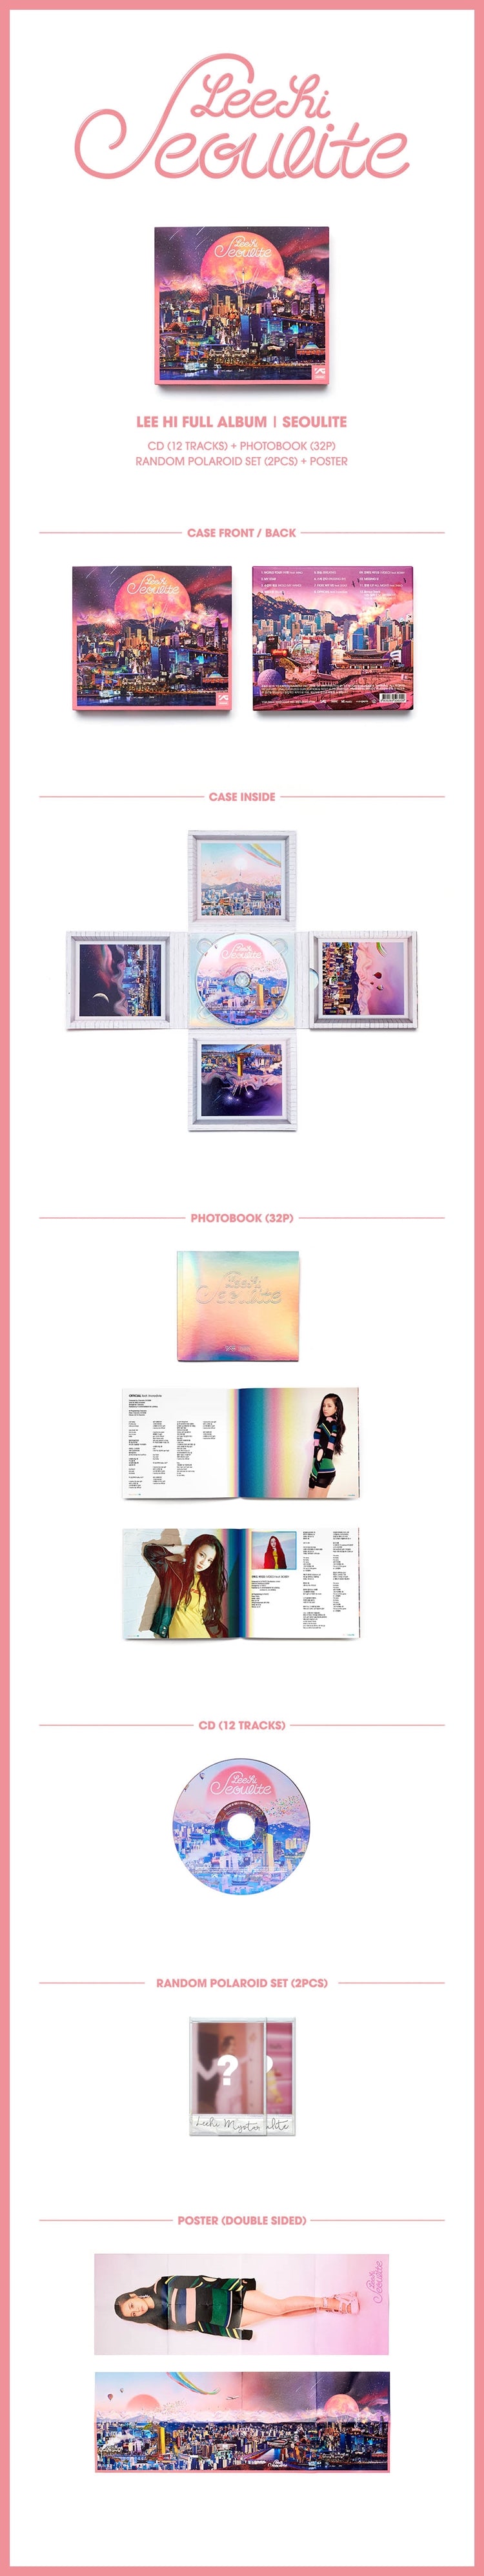 1 CD
1 Poster
1 Photo Book (32 pages)
2 Polaroid Cards